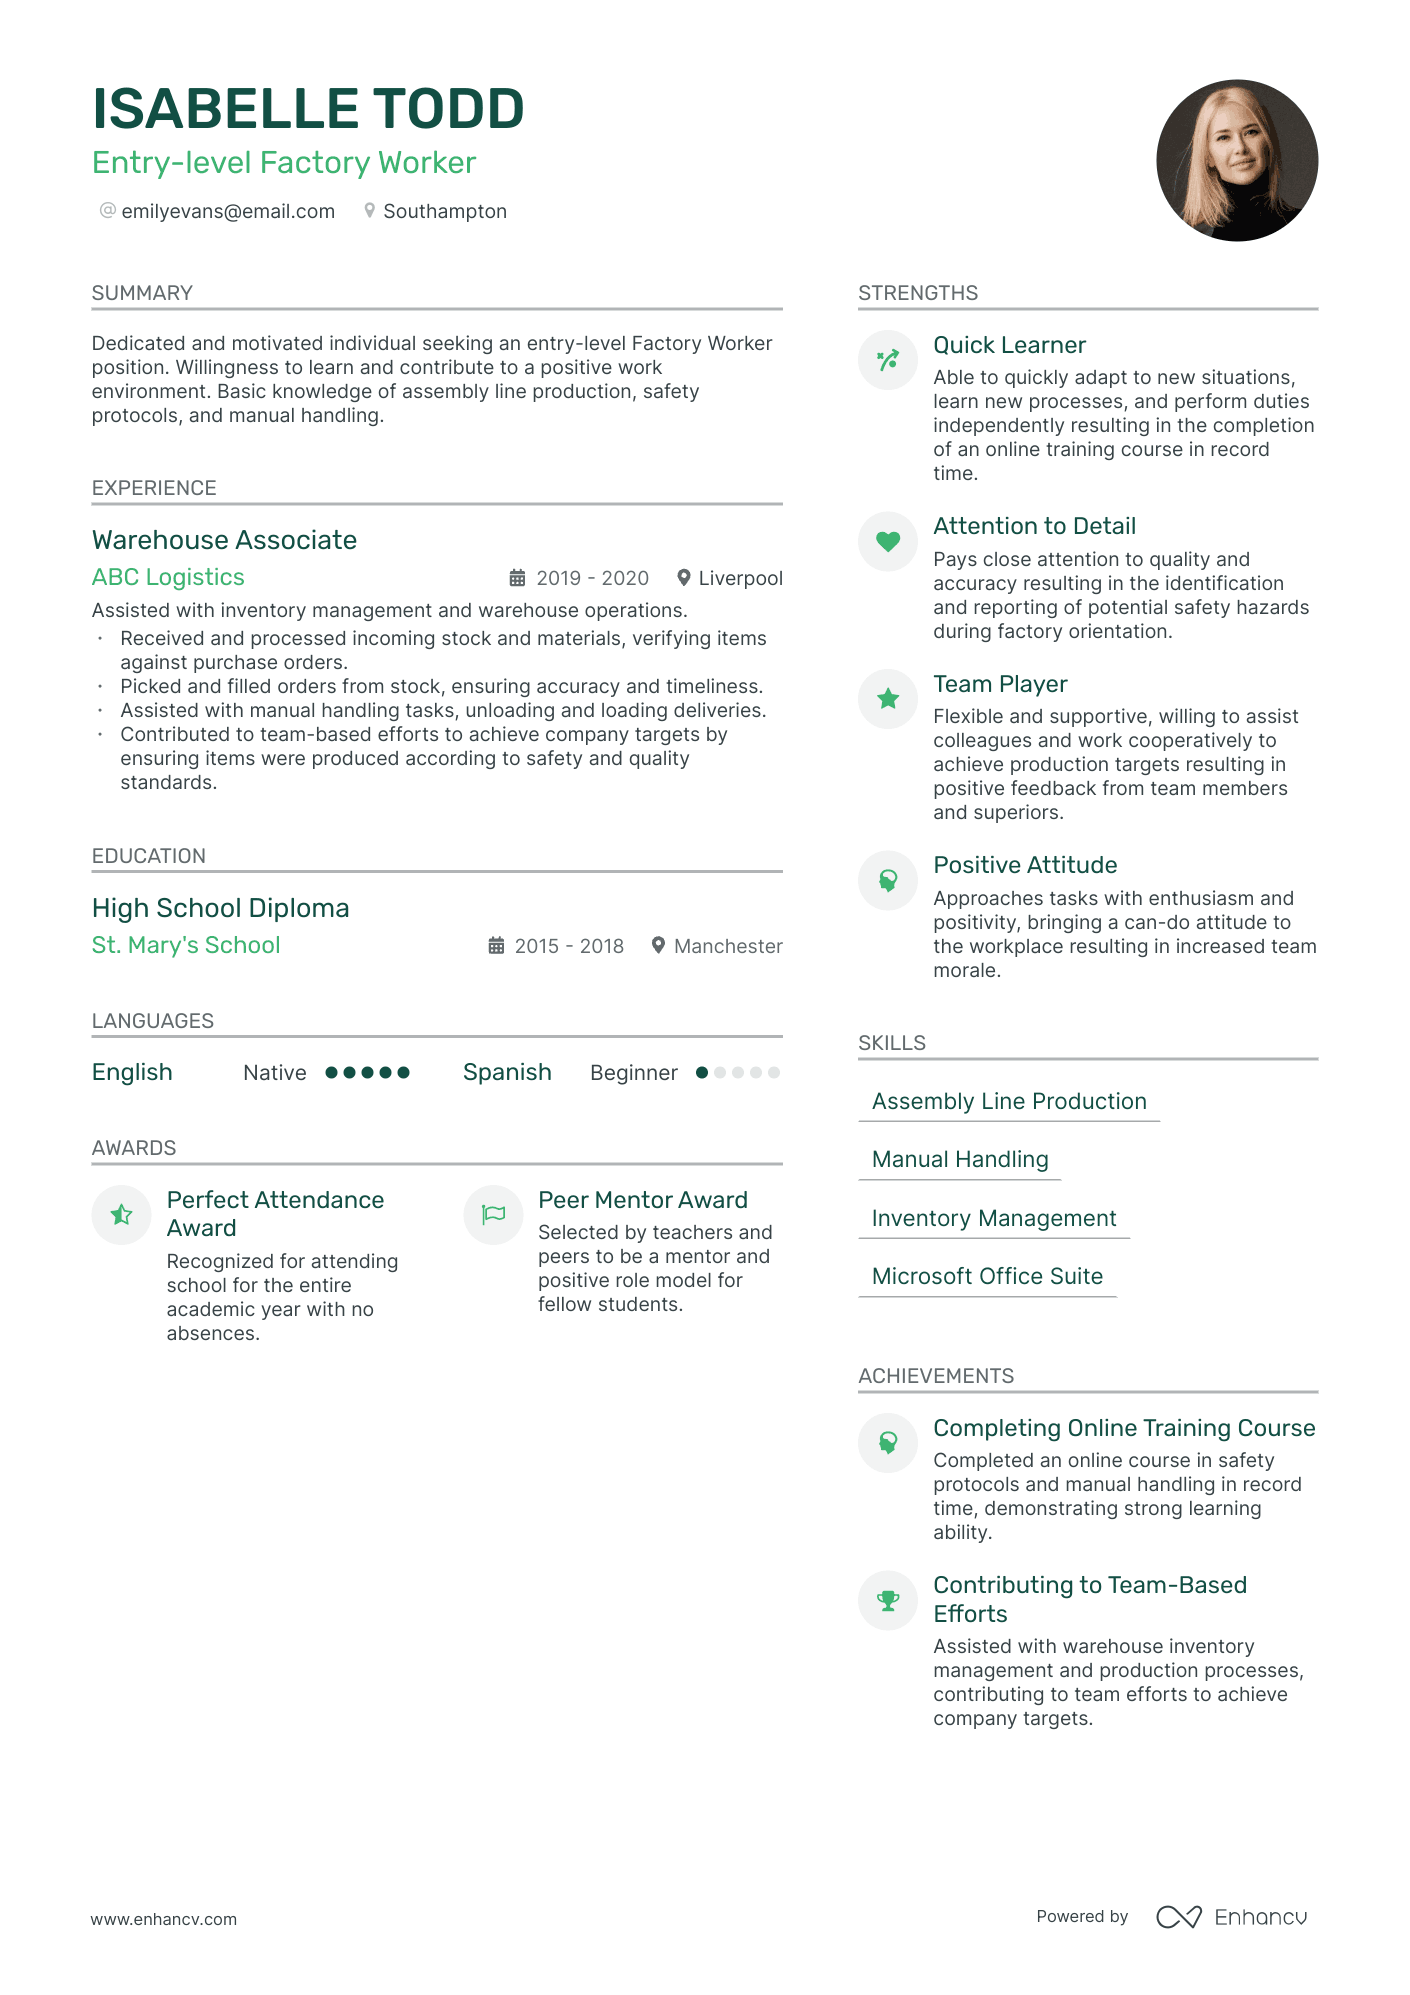 Entry level Factory Worker CV example